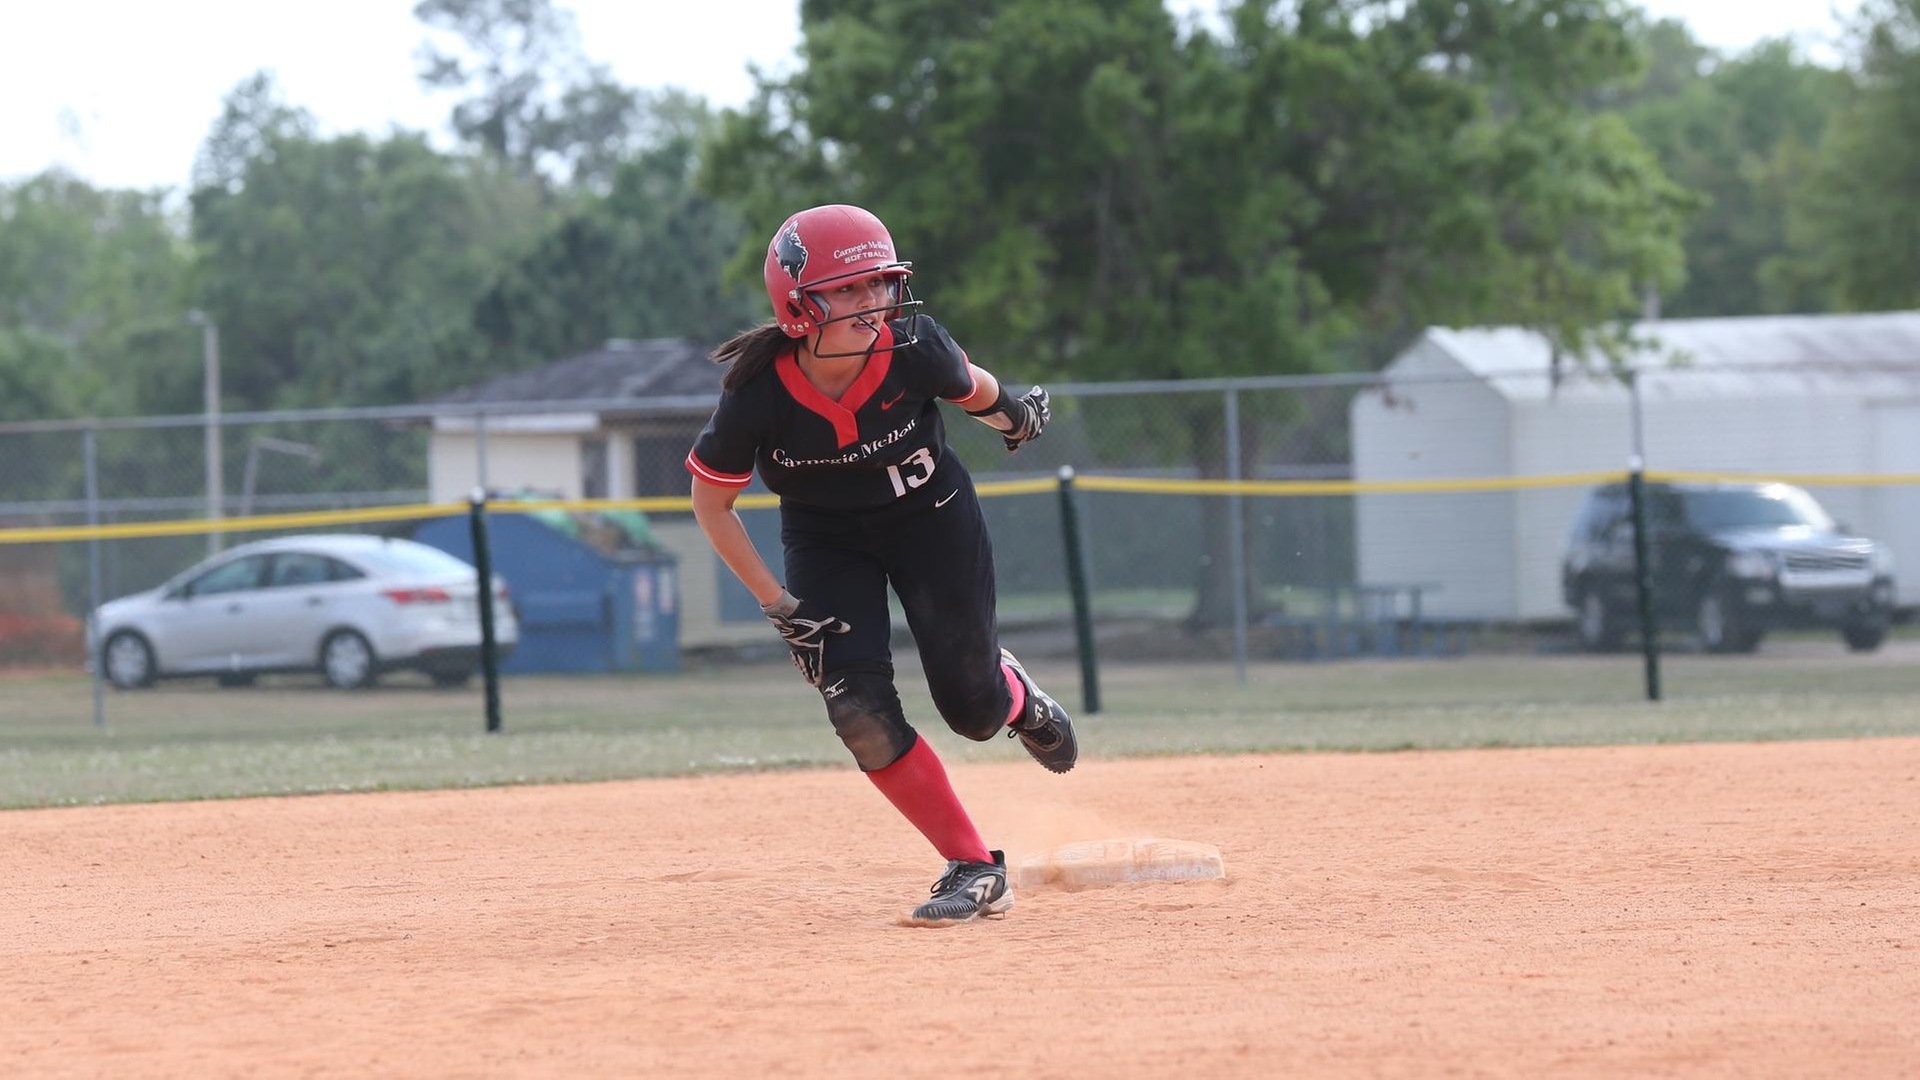 women's softball player wearing all black uniform with red trim running off second base